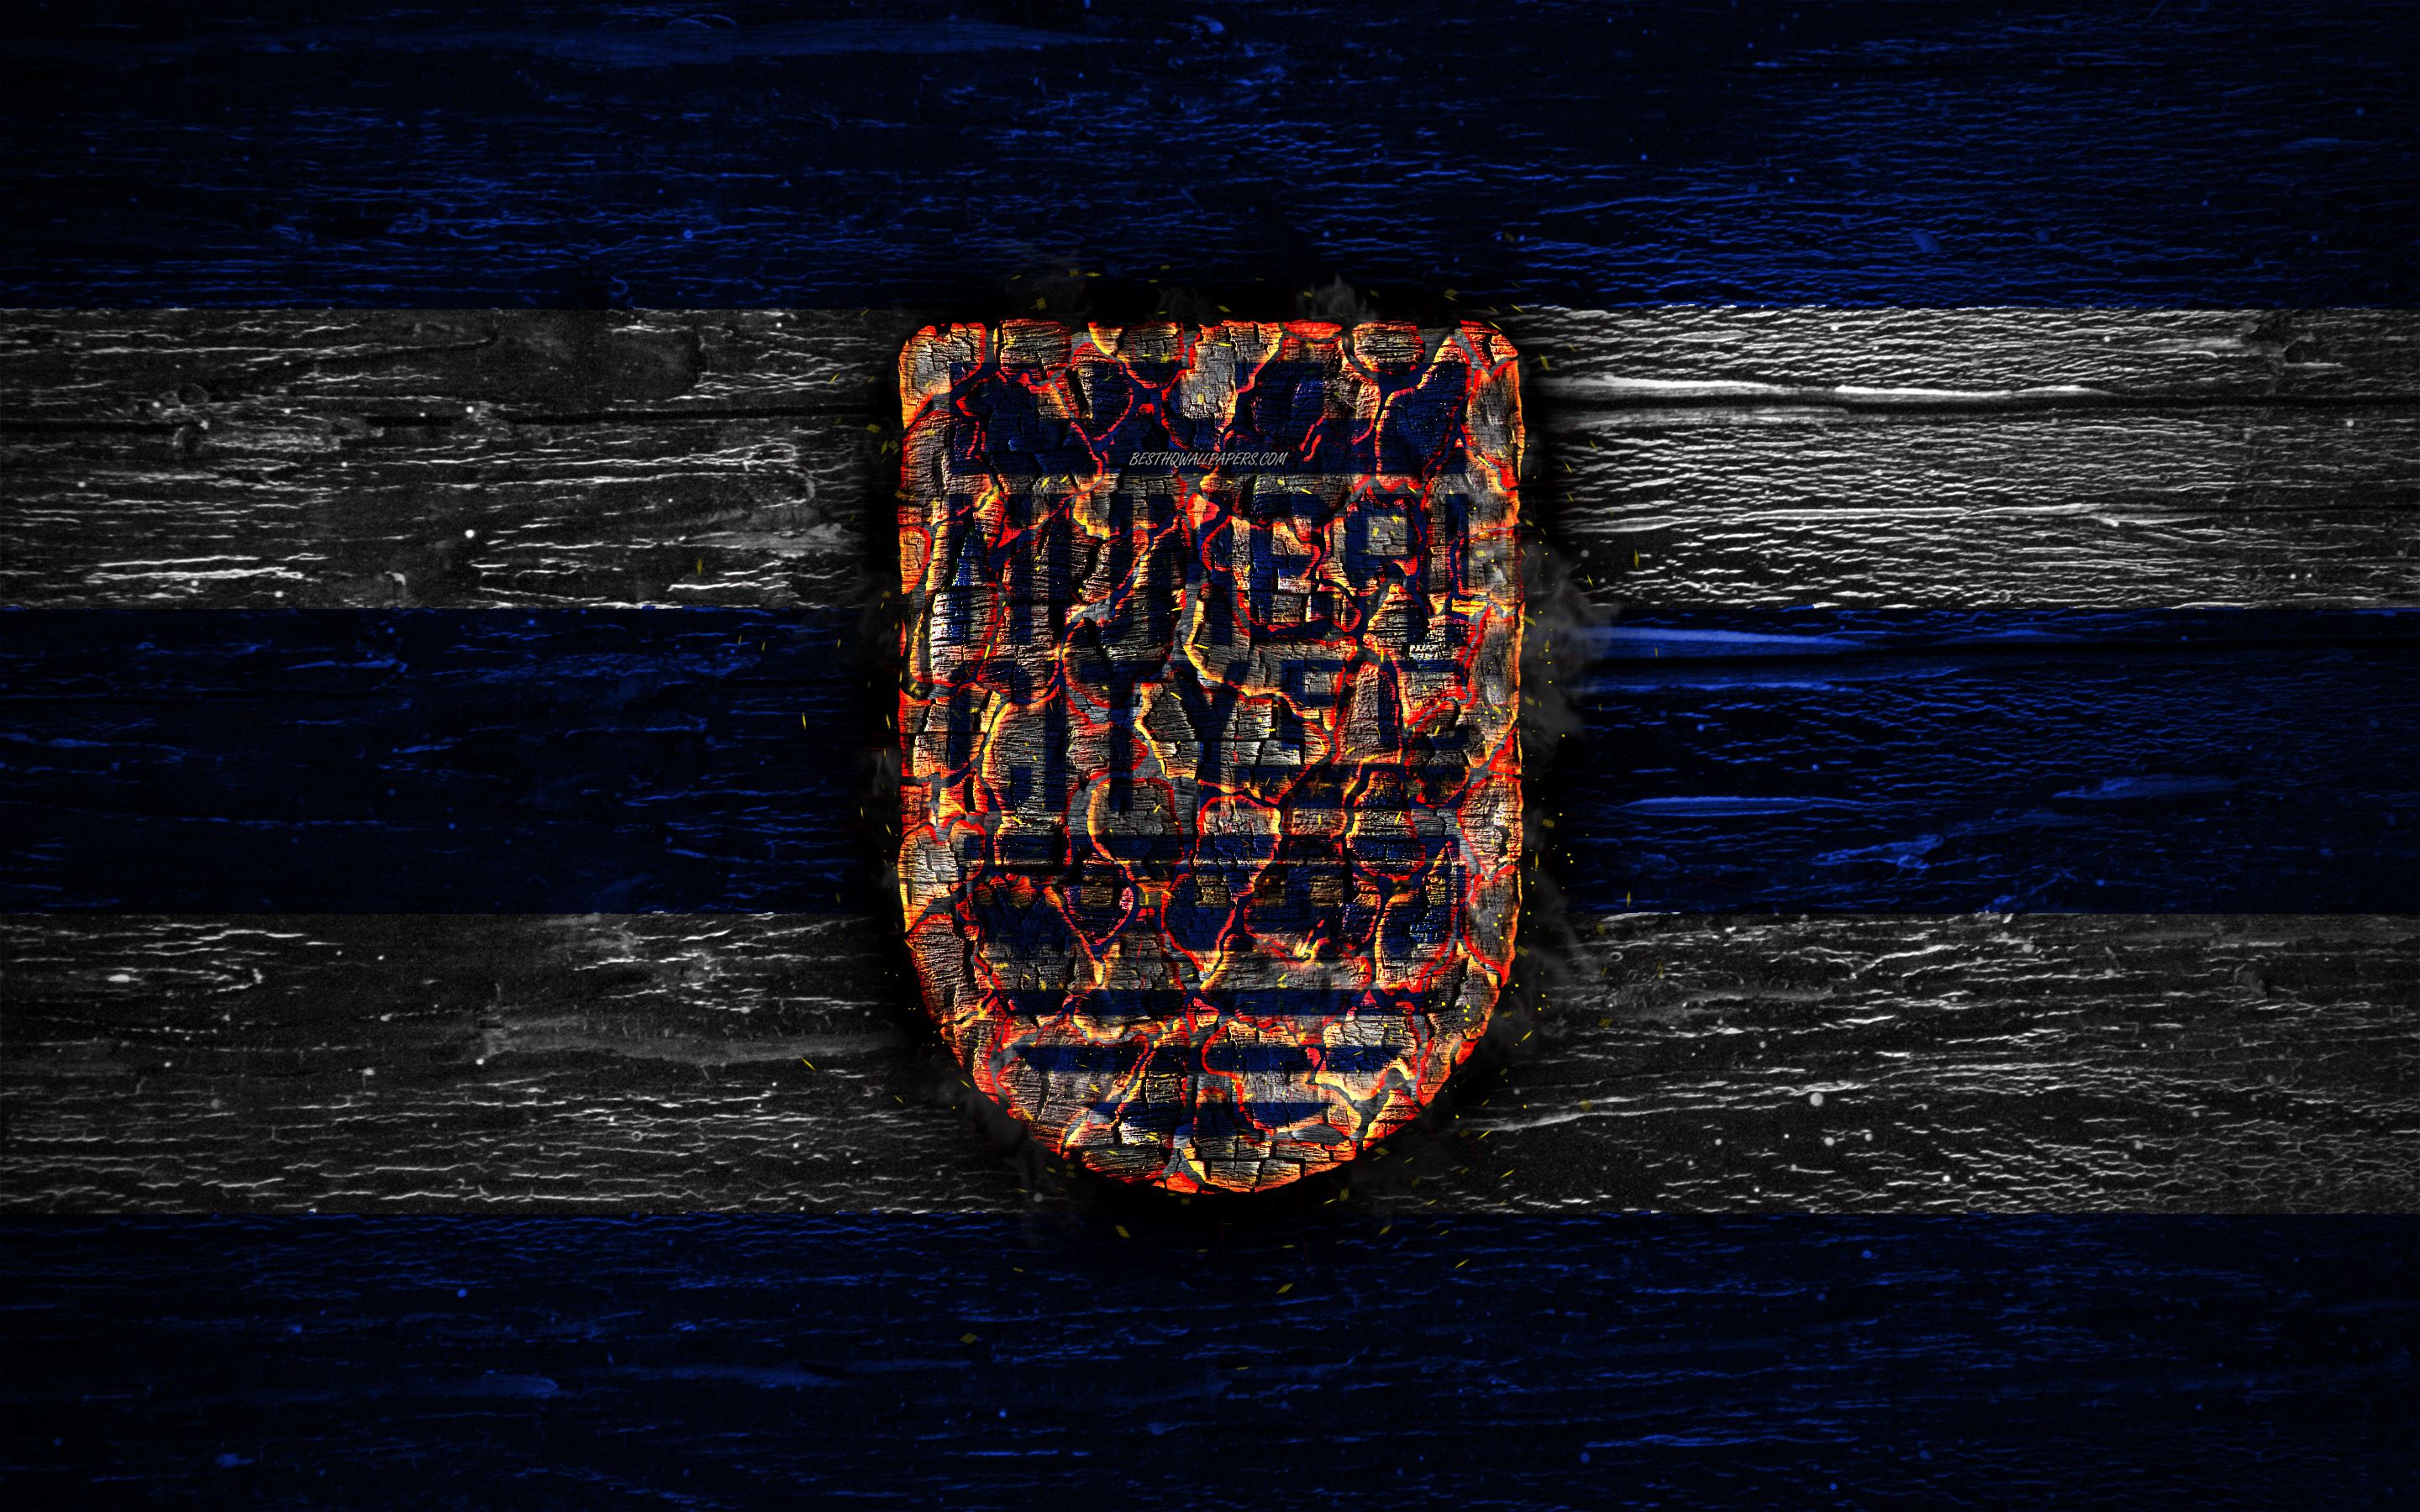 Download wallpaper Mumbai City FC, fire logo, Indian Super League, blue and white lines, ISL, Indian football club, grunge, football, soccer, logo, Mumbai City, wooden texture, India for desktop with resolution 2880x1800